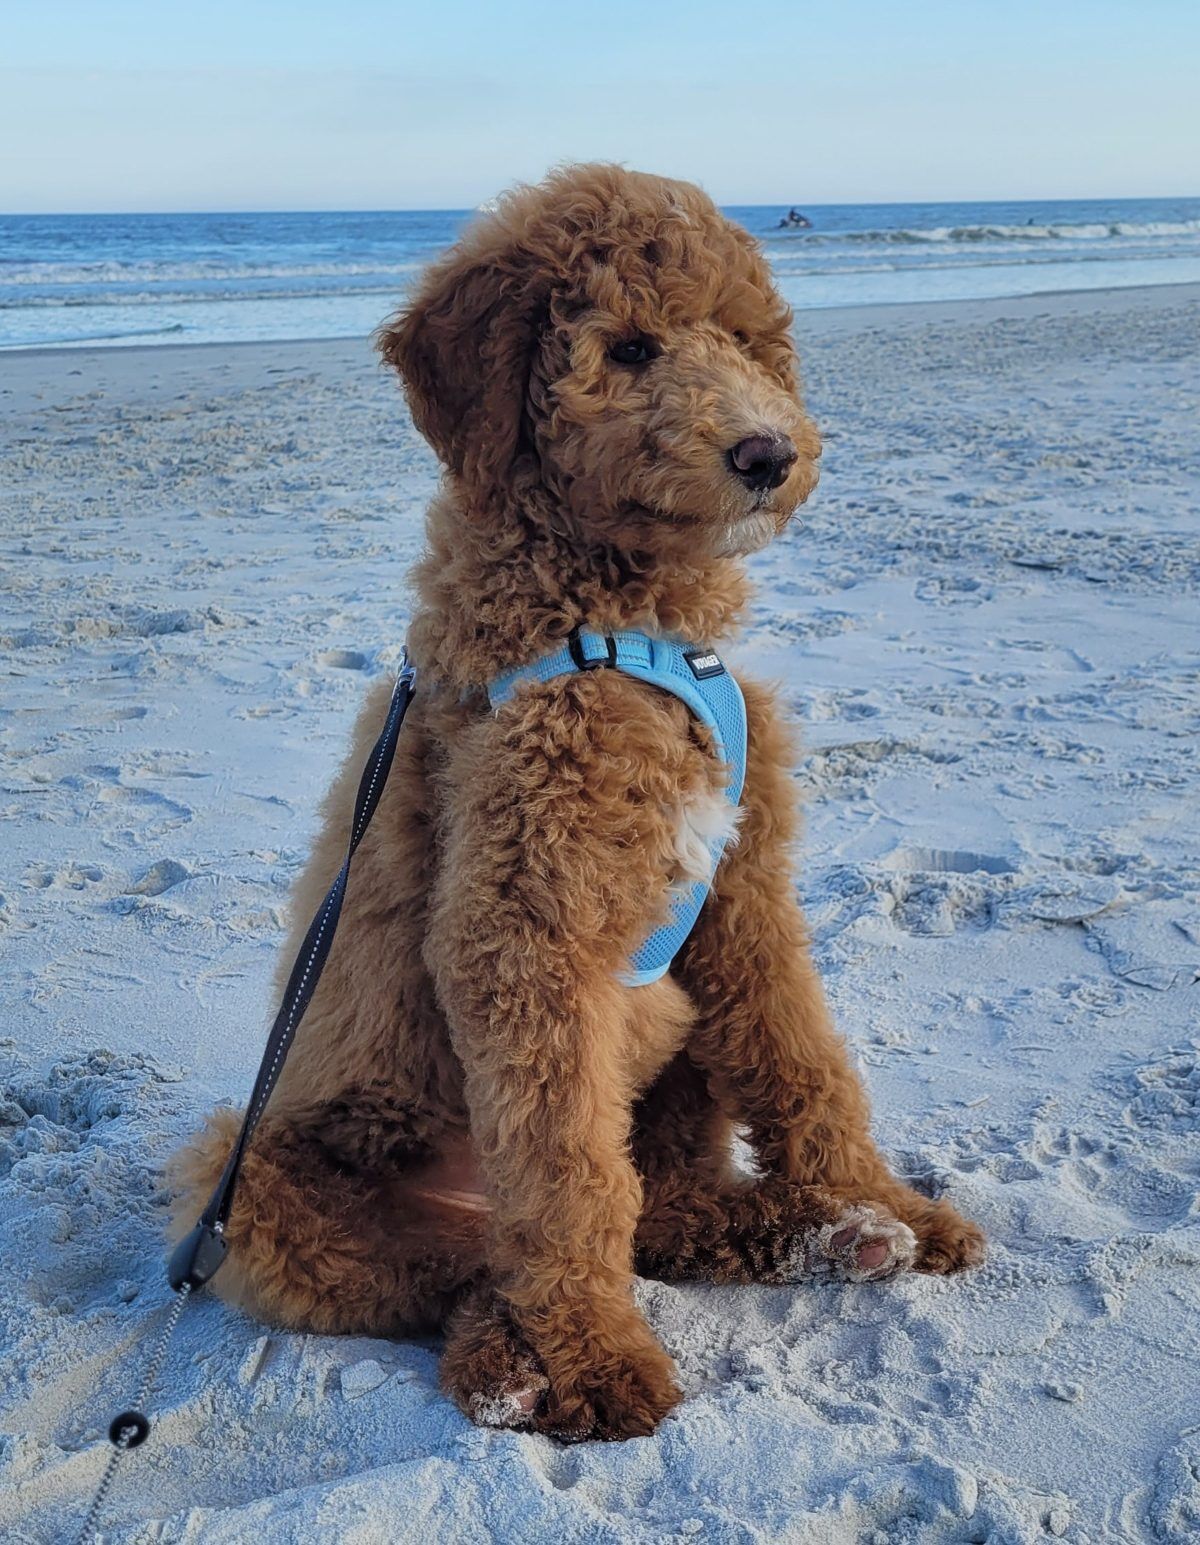 When Dogs Allowed on Jacksonville Beaches - Image of Mr. Jax a 7 month old brown Goldendoodle sitting attentively on Jacksonville, Florida beaches. Mr. Jax looks happy wearing a blue harness and lease. The puppy paws are sandy on a white sand beach. The ocean waves are visable in the background.